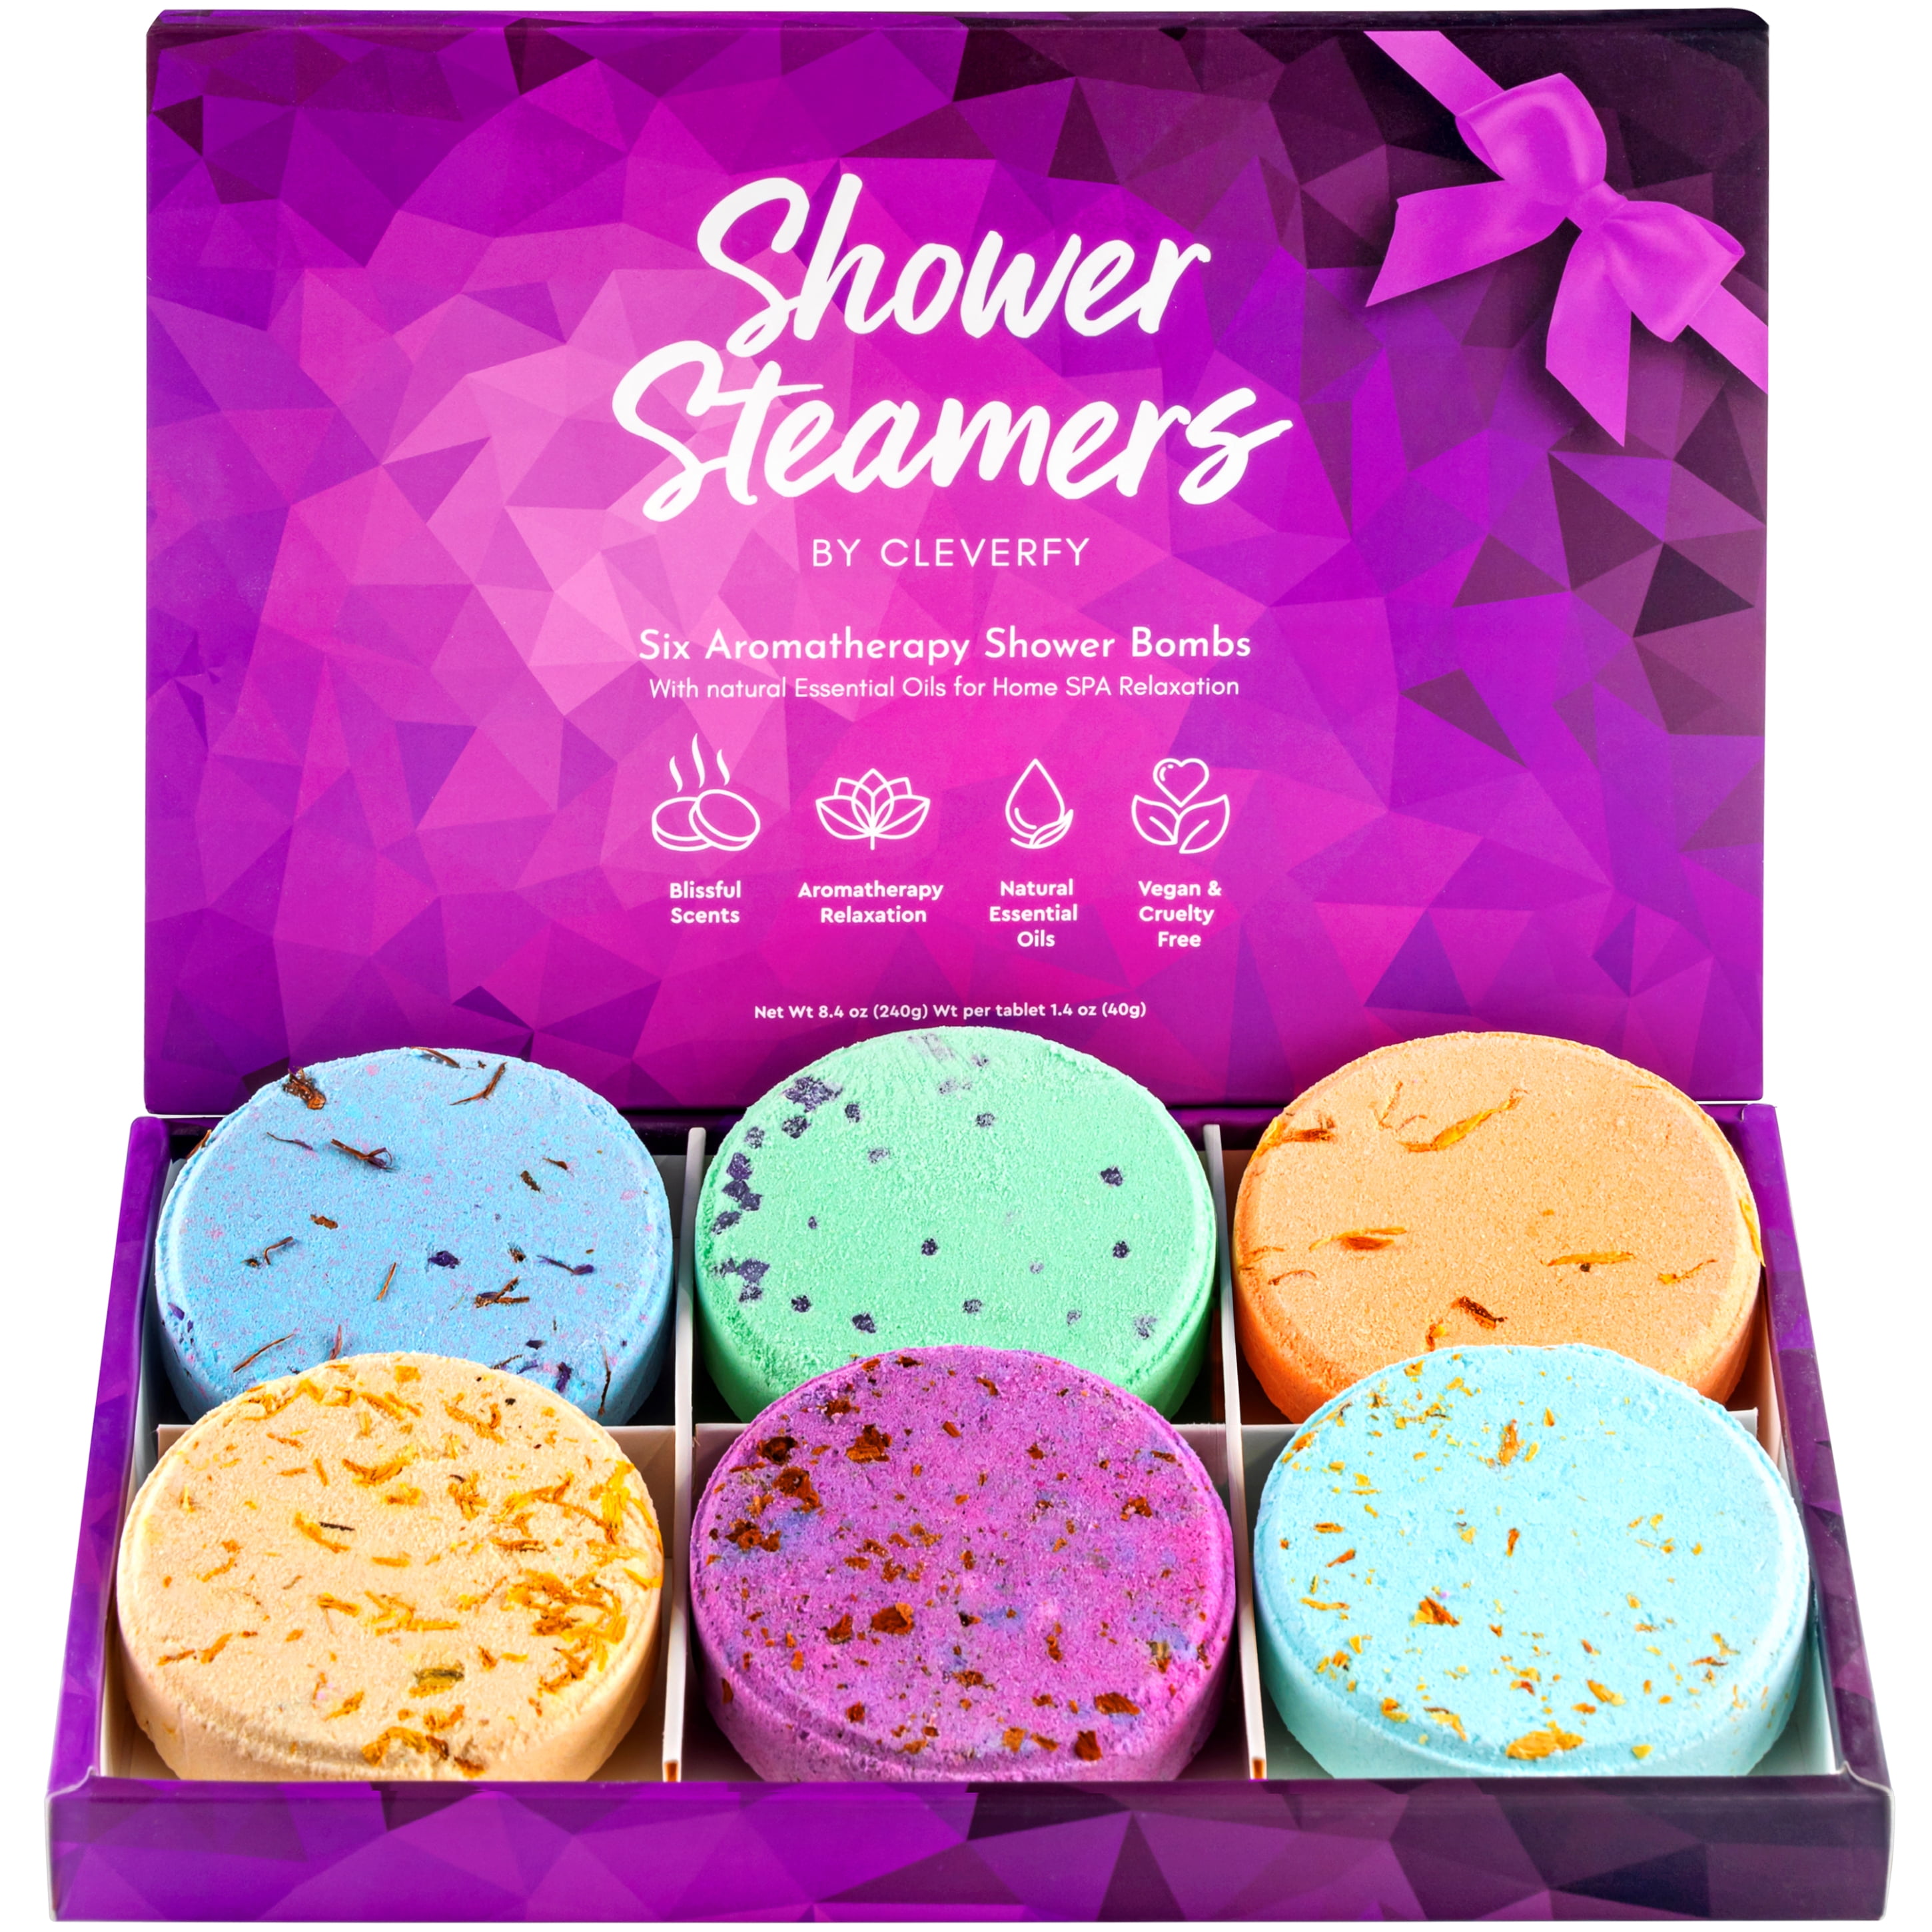  Shower Steamers Aromatherapy Christmas Gifts Stocking Stuffers  for Women 8 PCS, BLRIET Shower Bombs Birthday Gift for Mom with Lavender  Natural Essential Oils, Self Care & Relaxation Gifts for Lover 